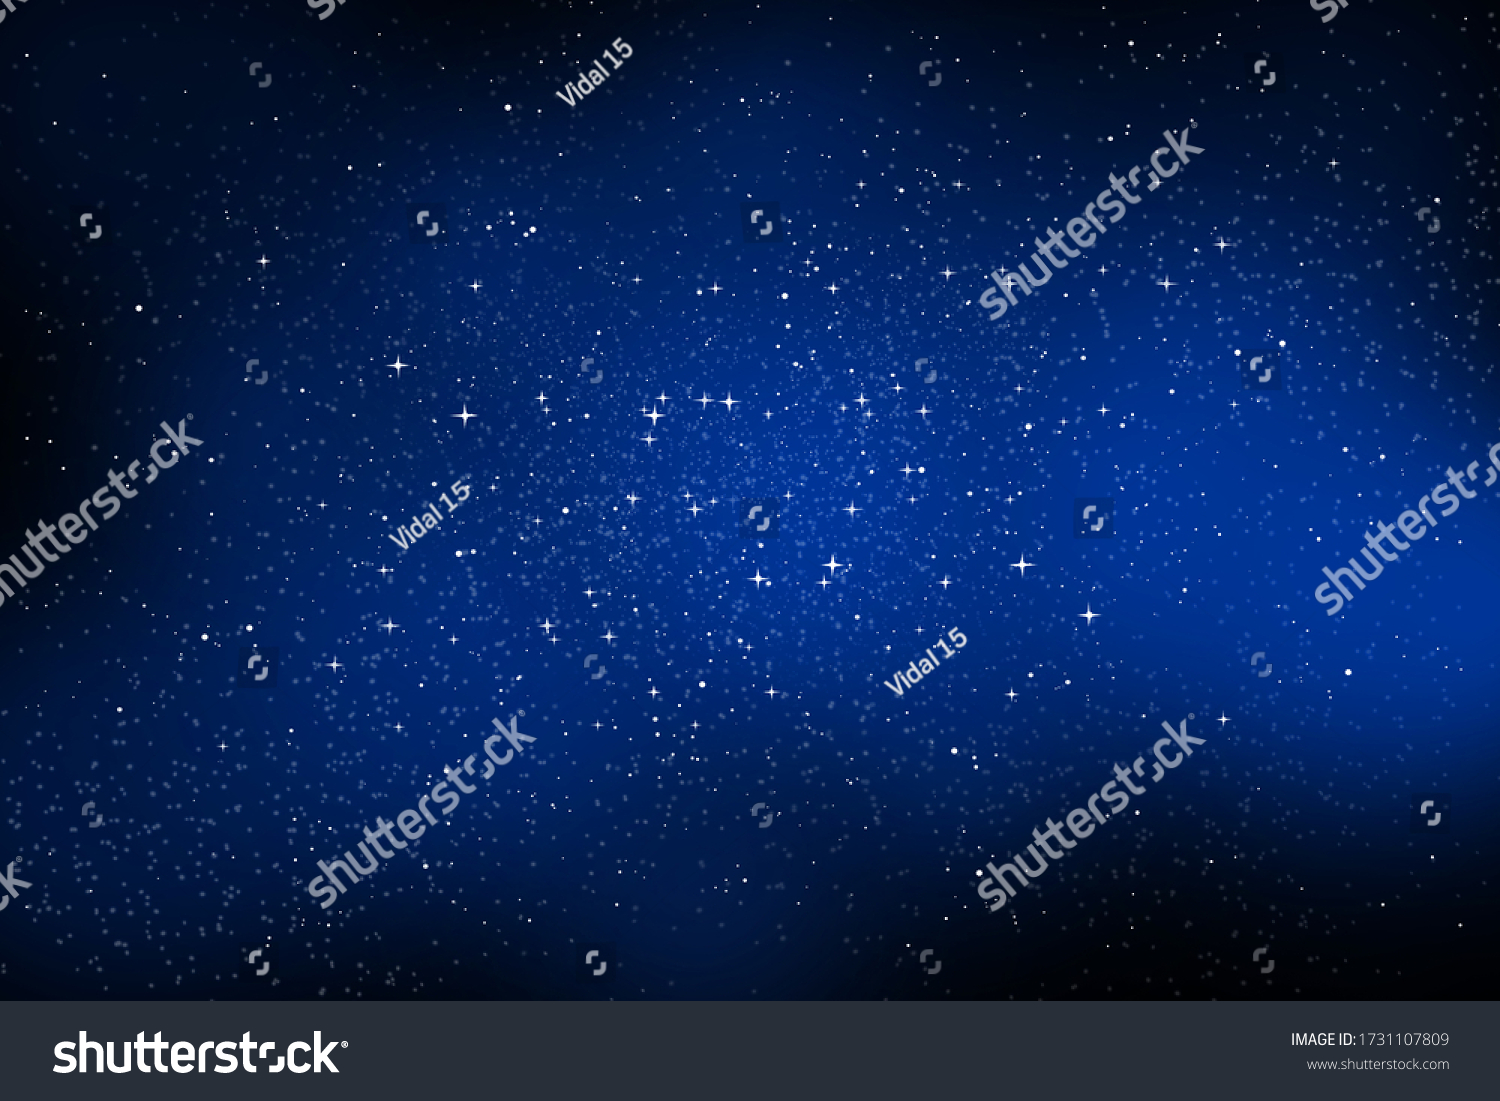 4,432 Stary night sky Images, Stock Photos & Vectors | Shutterstock